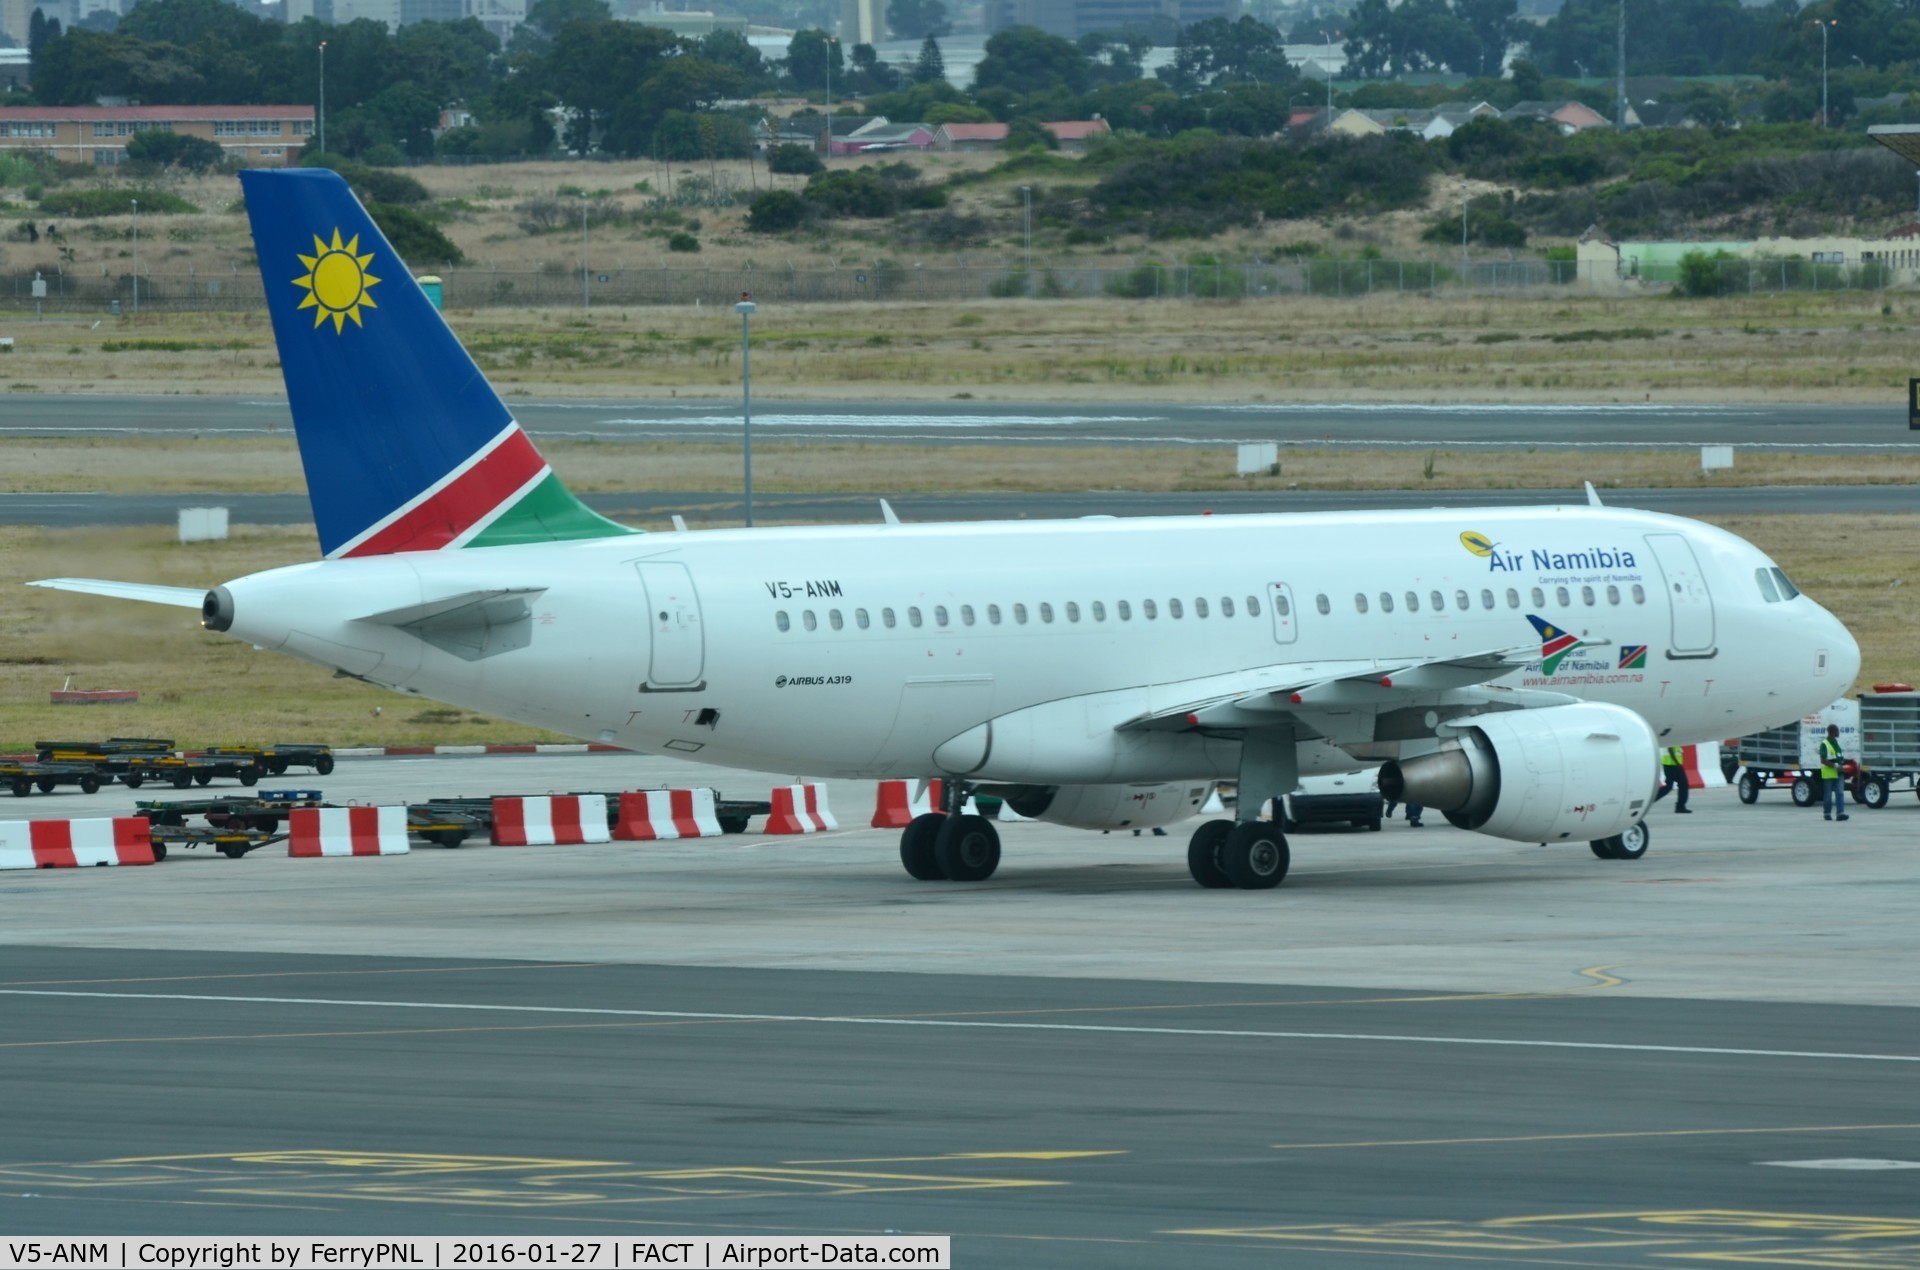 V5-ANM, 2013 Airbus A319-112 C/N 5366, Air Namibia A319 parked at CPT